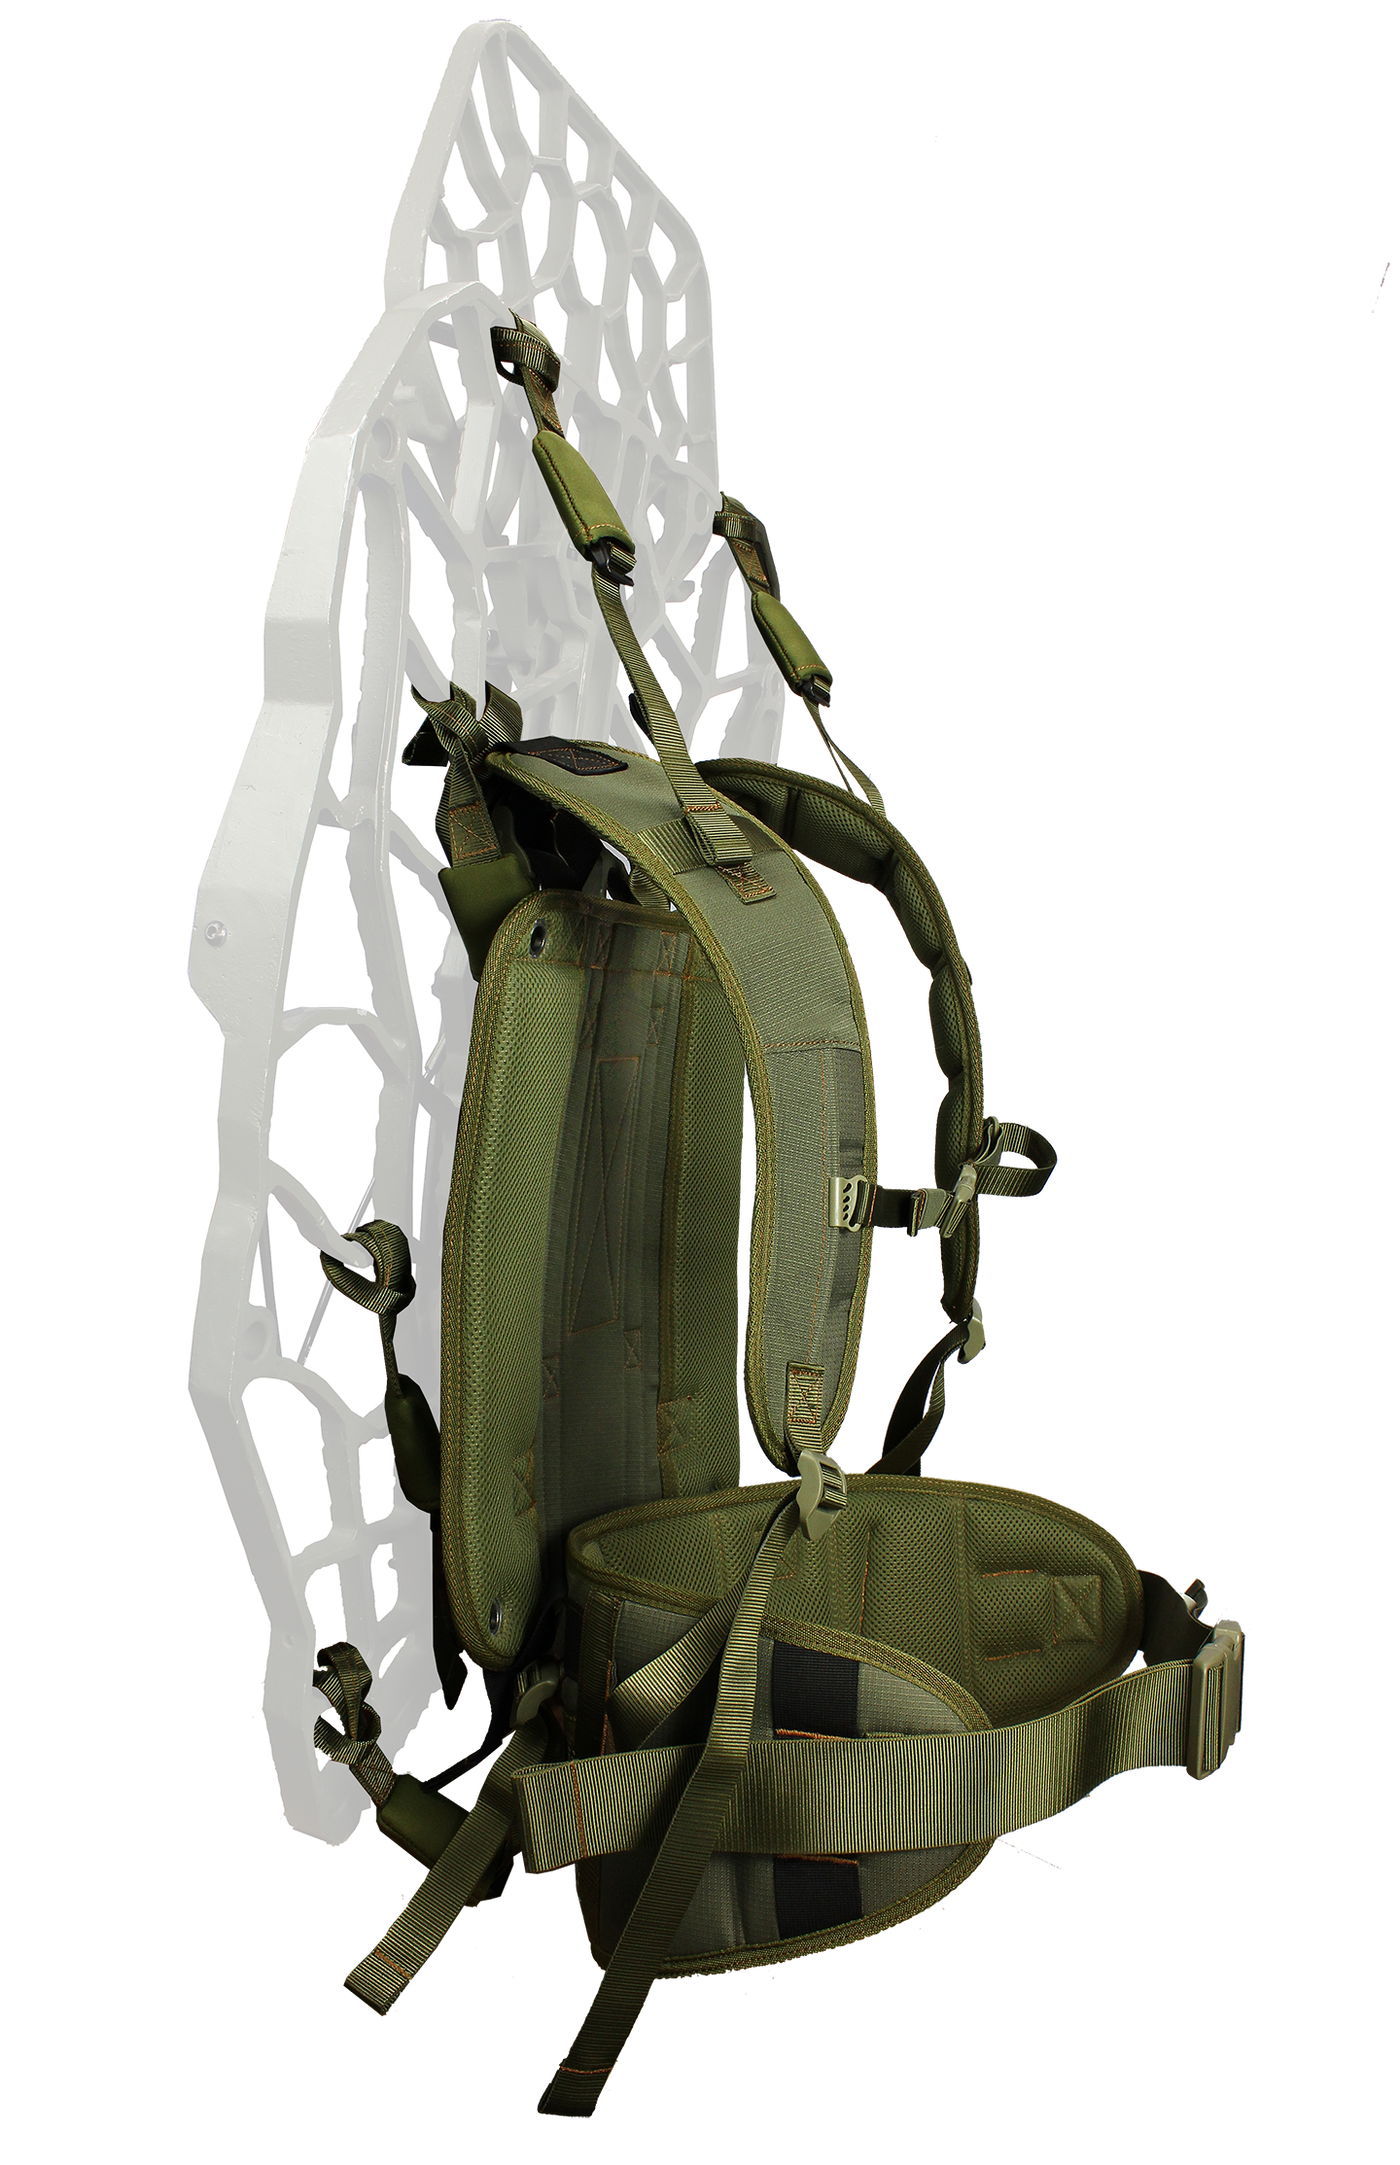 Treestand Backpack Carrying Straps